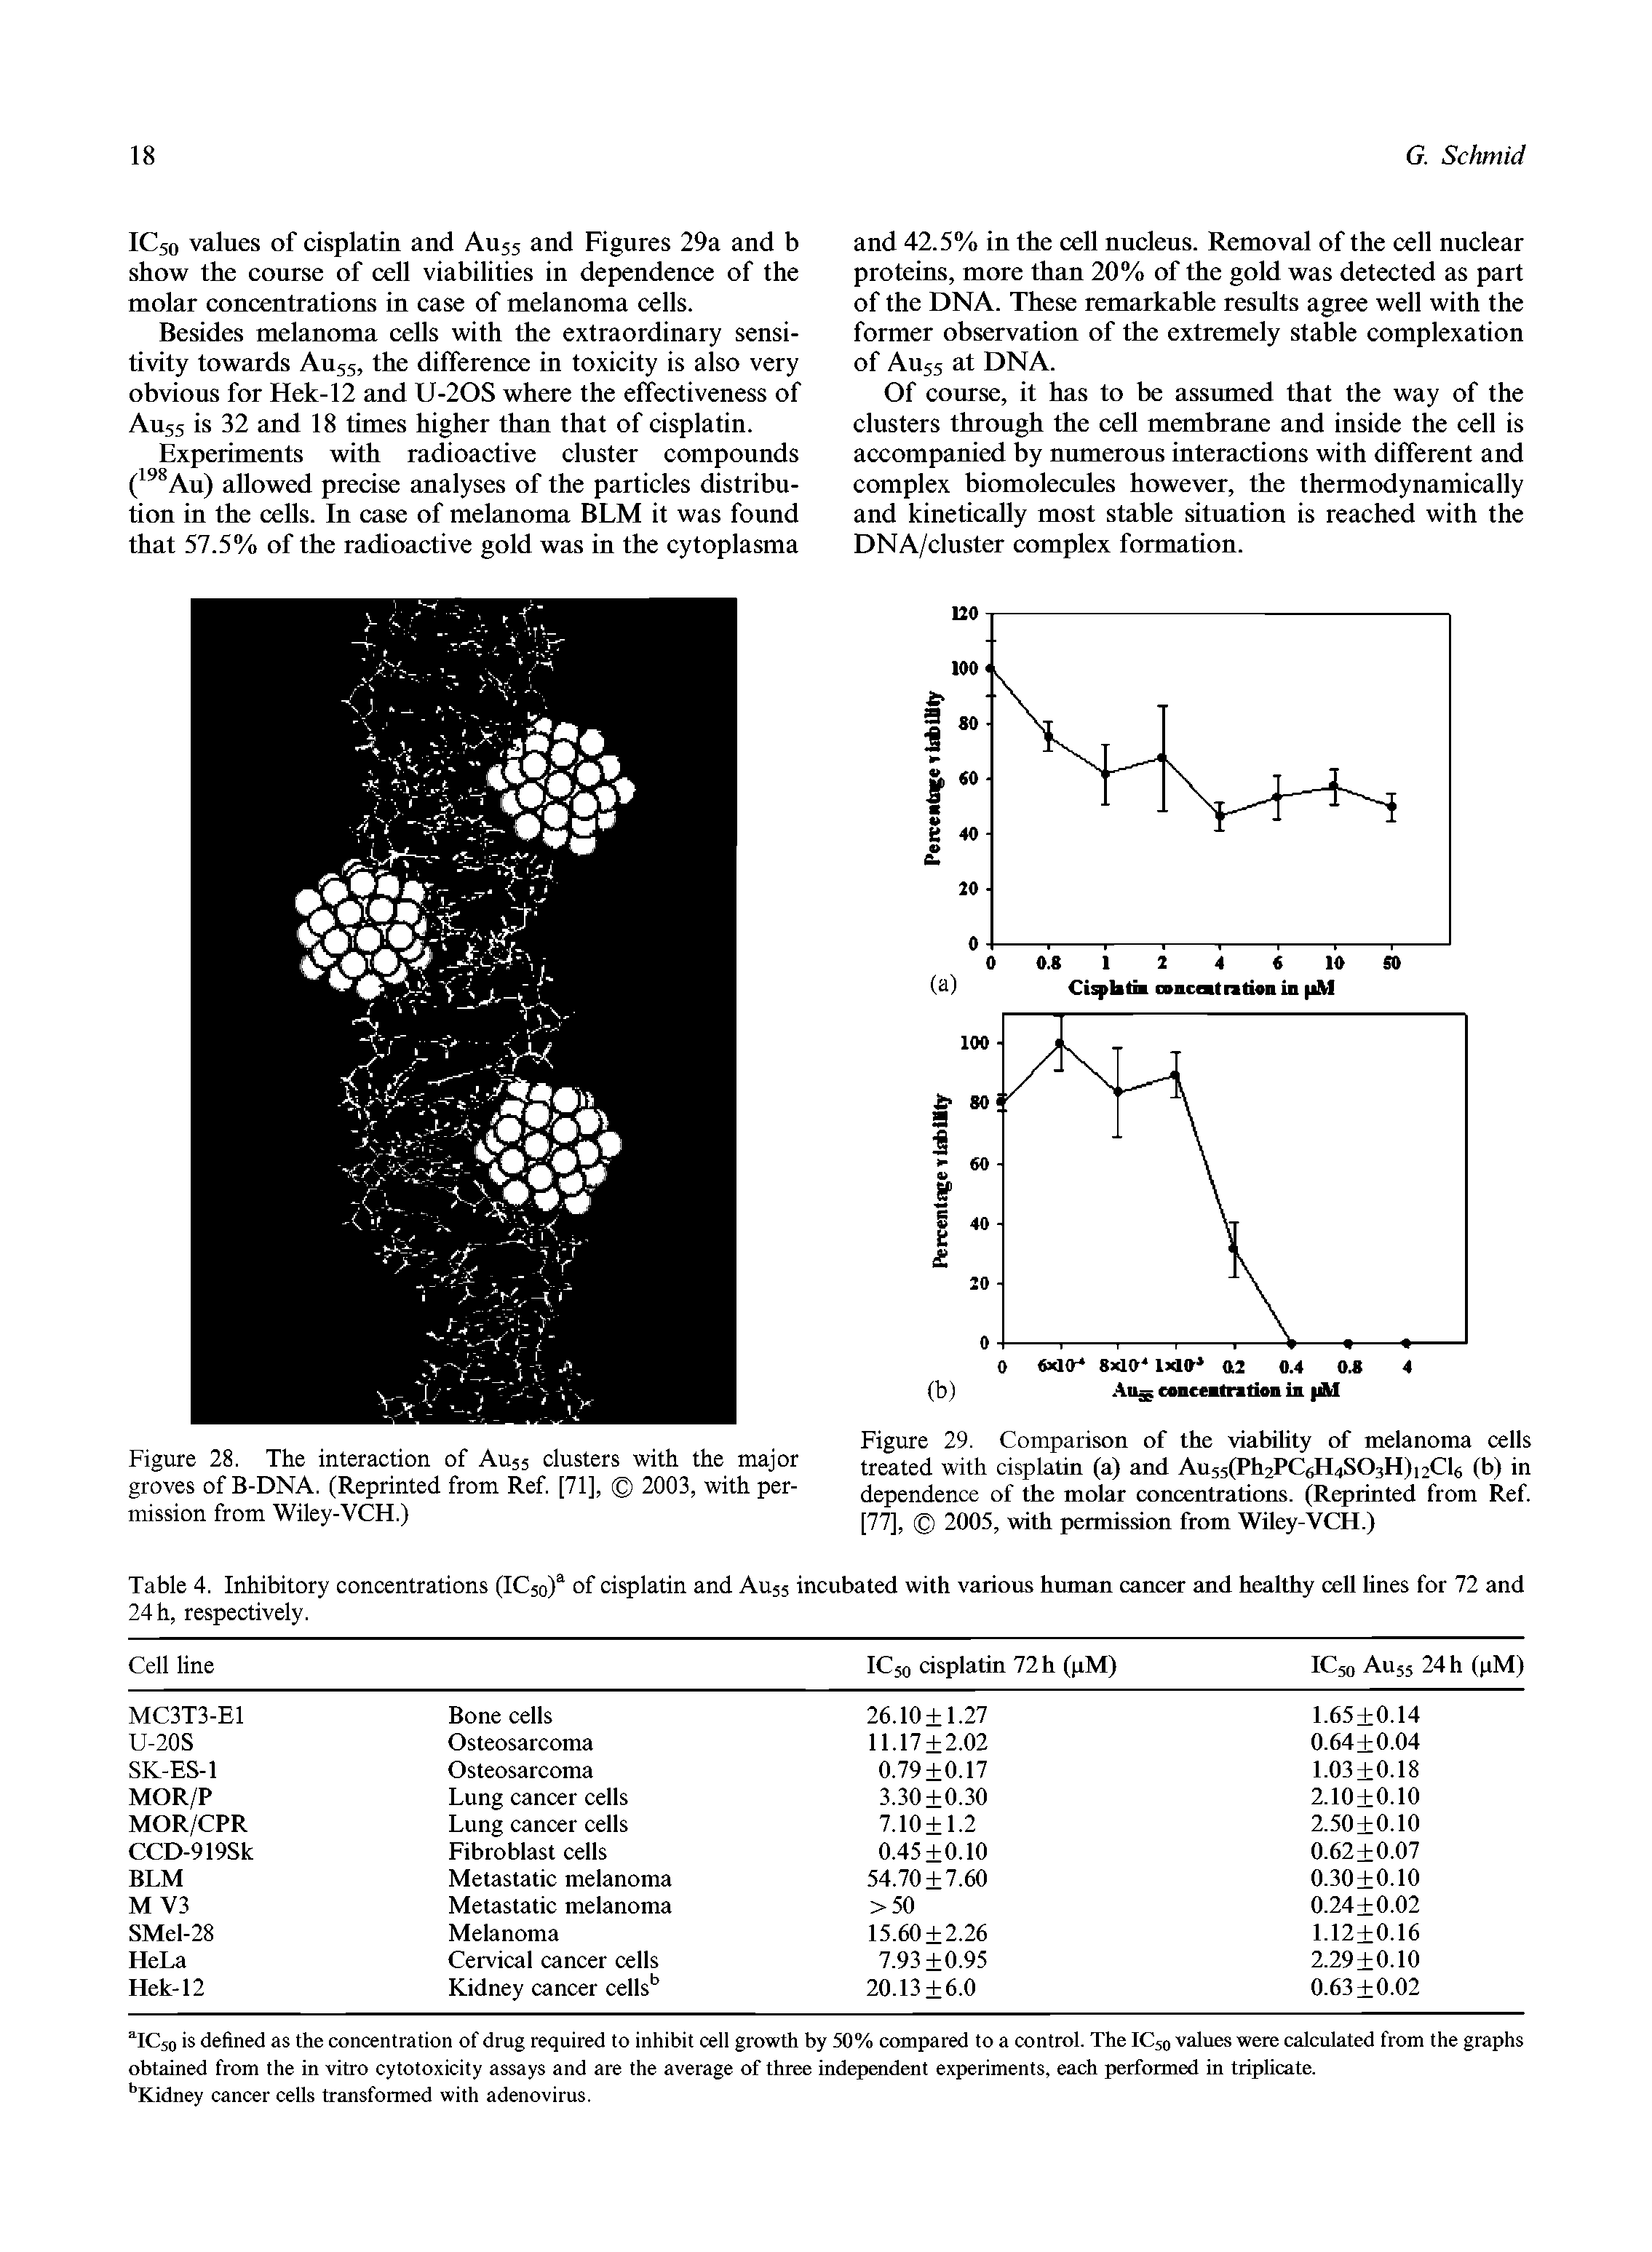 Figure 29. Comparison of the viability of melanoma cells treated with cisplatin (a) and Au55(Ph2PC6H4S03H)i2Cl6 (b) in dependence of the molar concentrations. (Reprinted from Ref [77], 2005, with permission from Wiley-VCH.)...